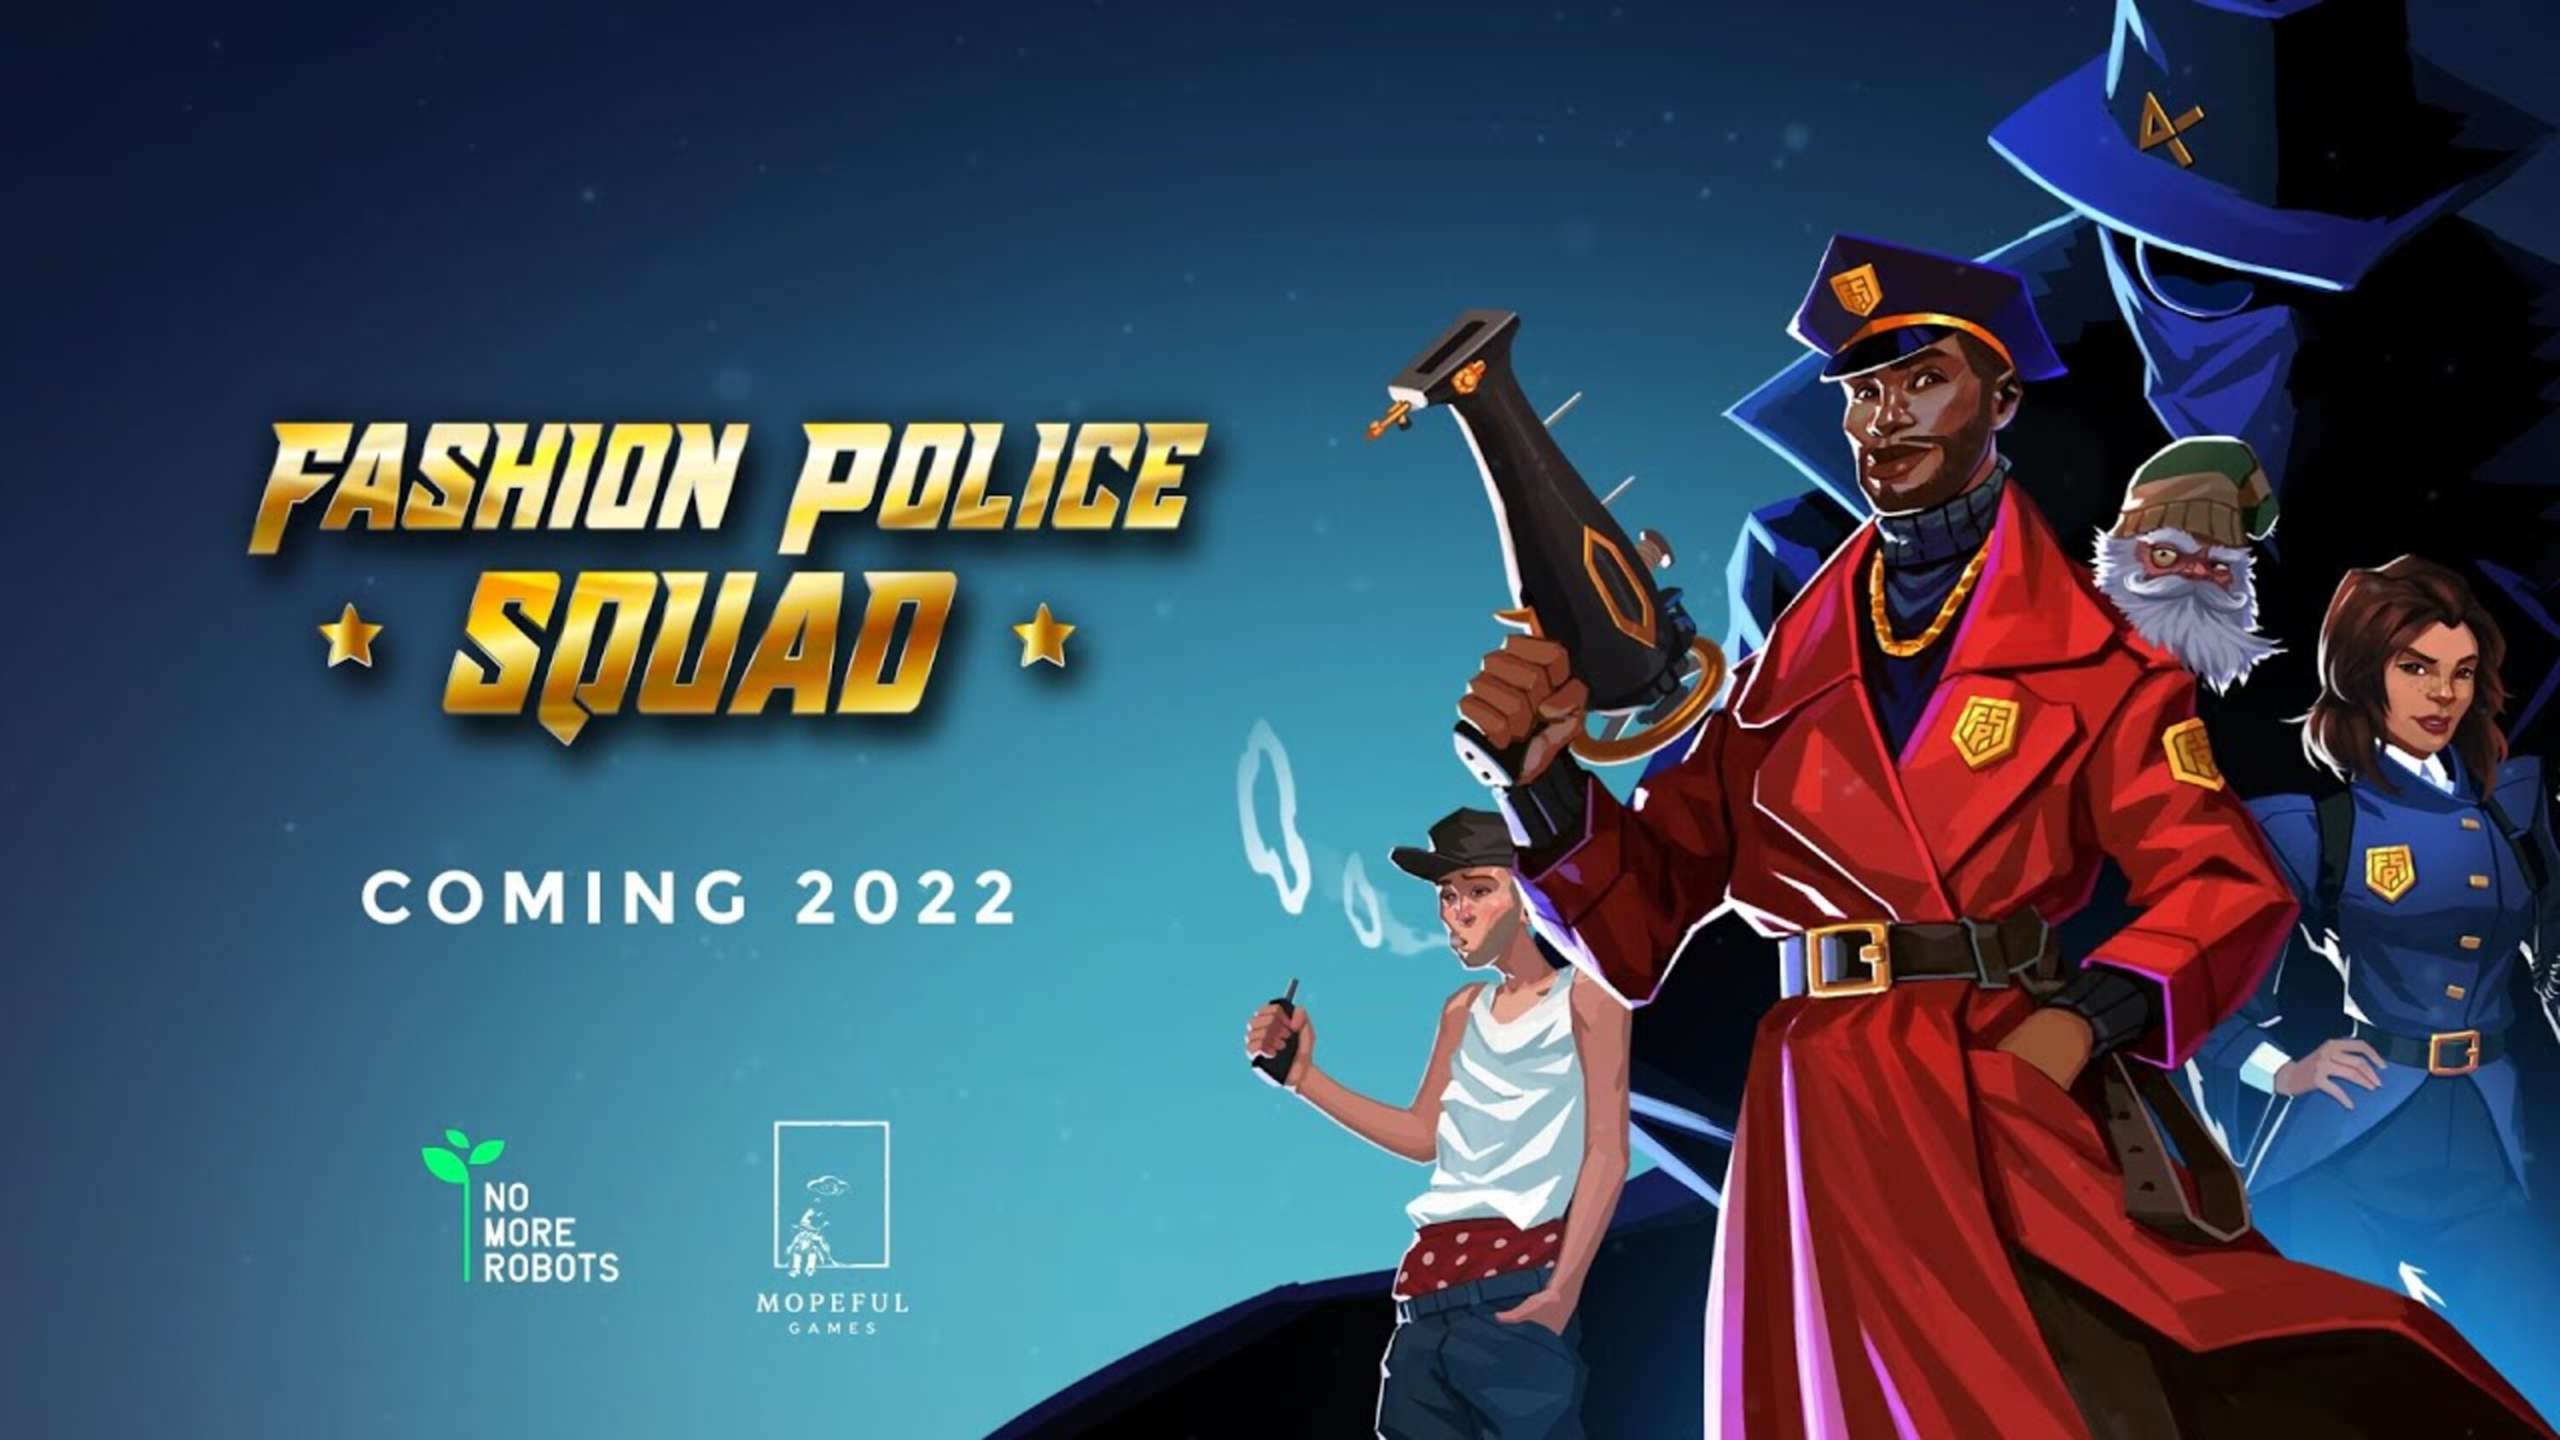 Fashion Police Squad Is A Fantastic Arena FPS Retro-Shooter, Even If It Appears To Be A Novelty Title